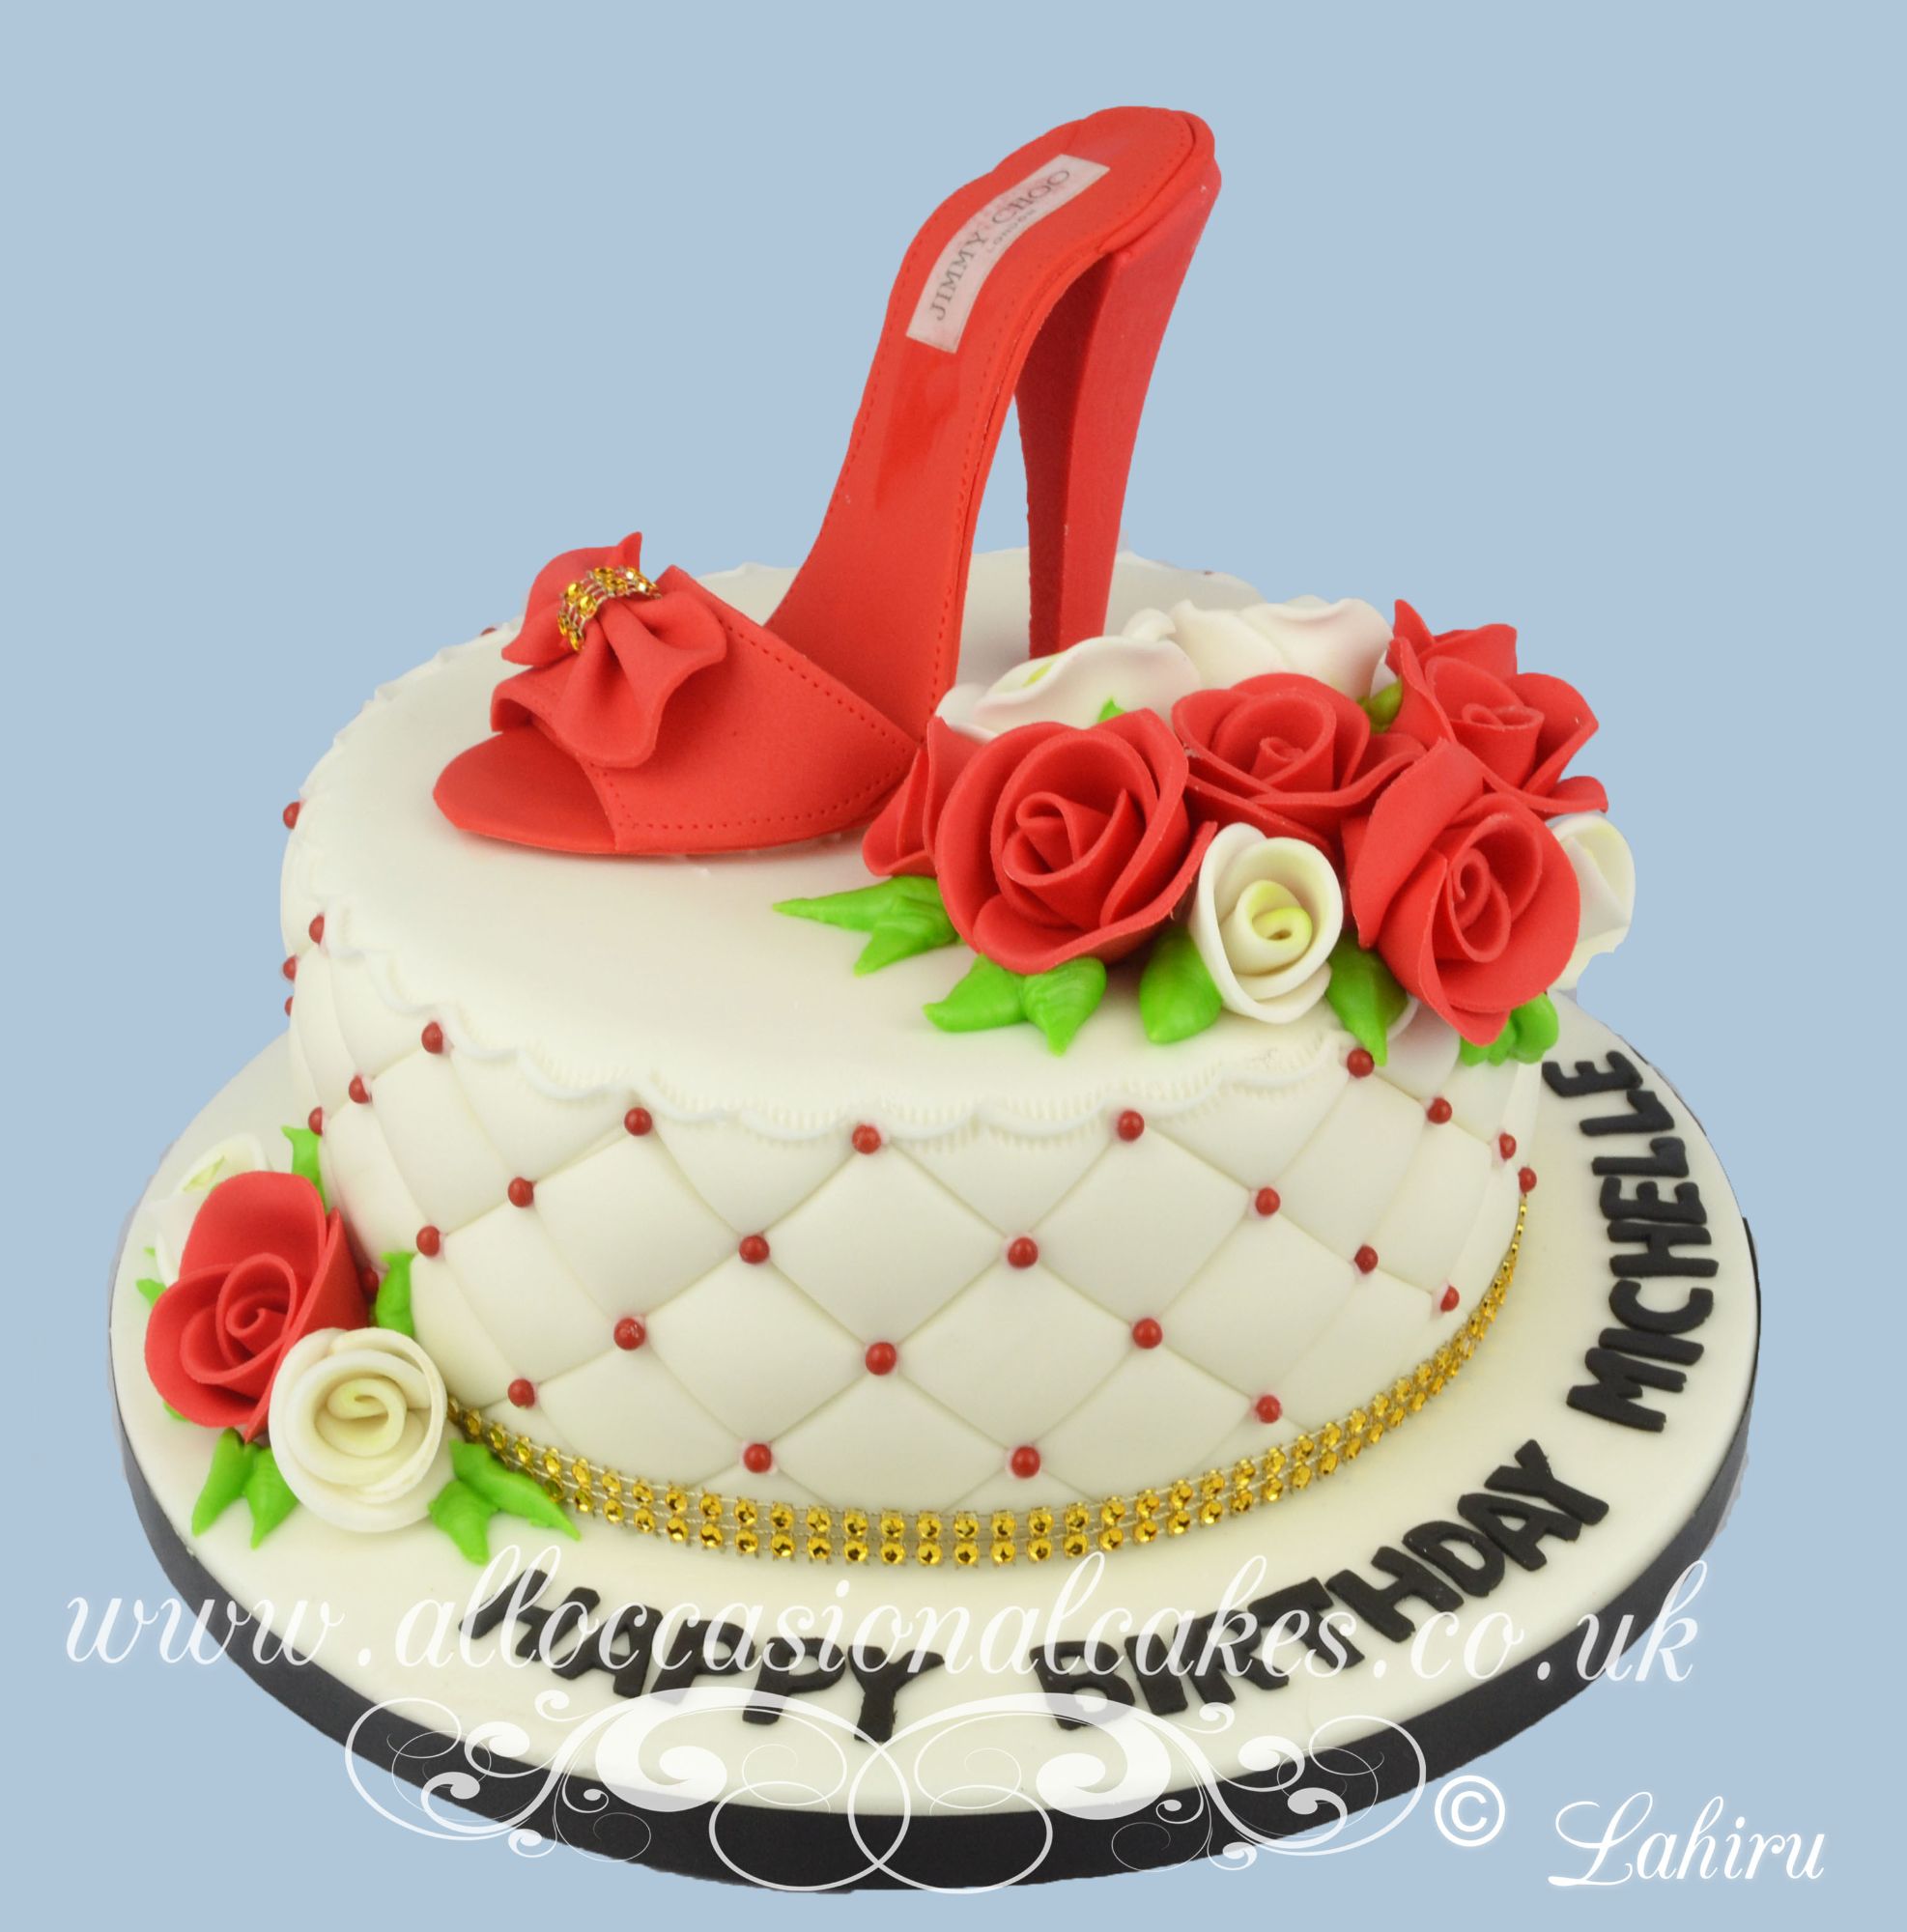 Anniversary Cakes Gallery / Patty Cakes / Custom Cakes, Cupcakes and More /  Highland, IL / 618-654-8180